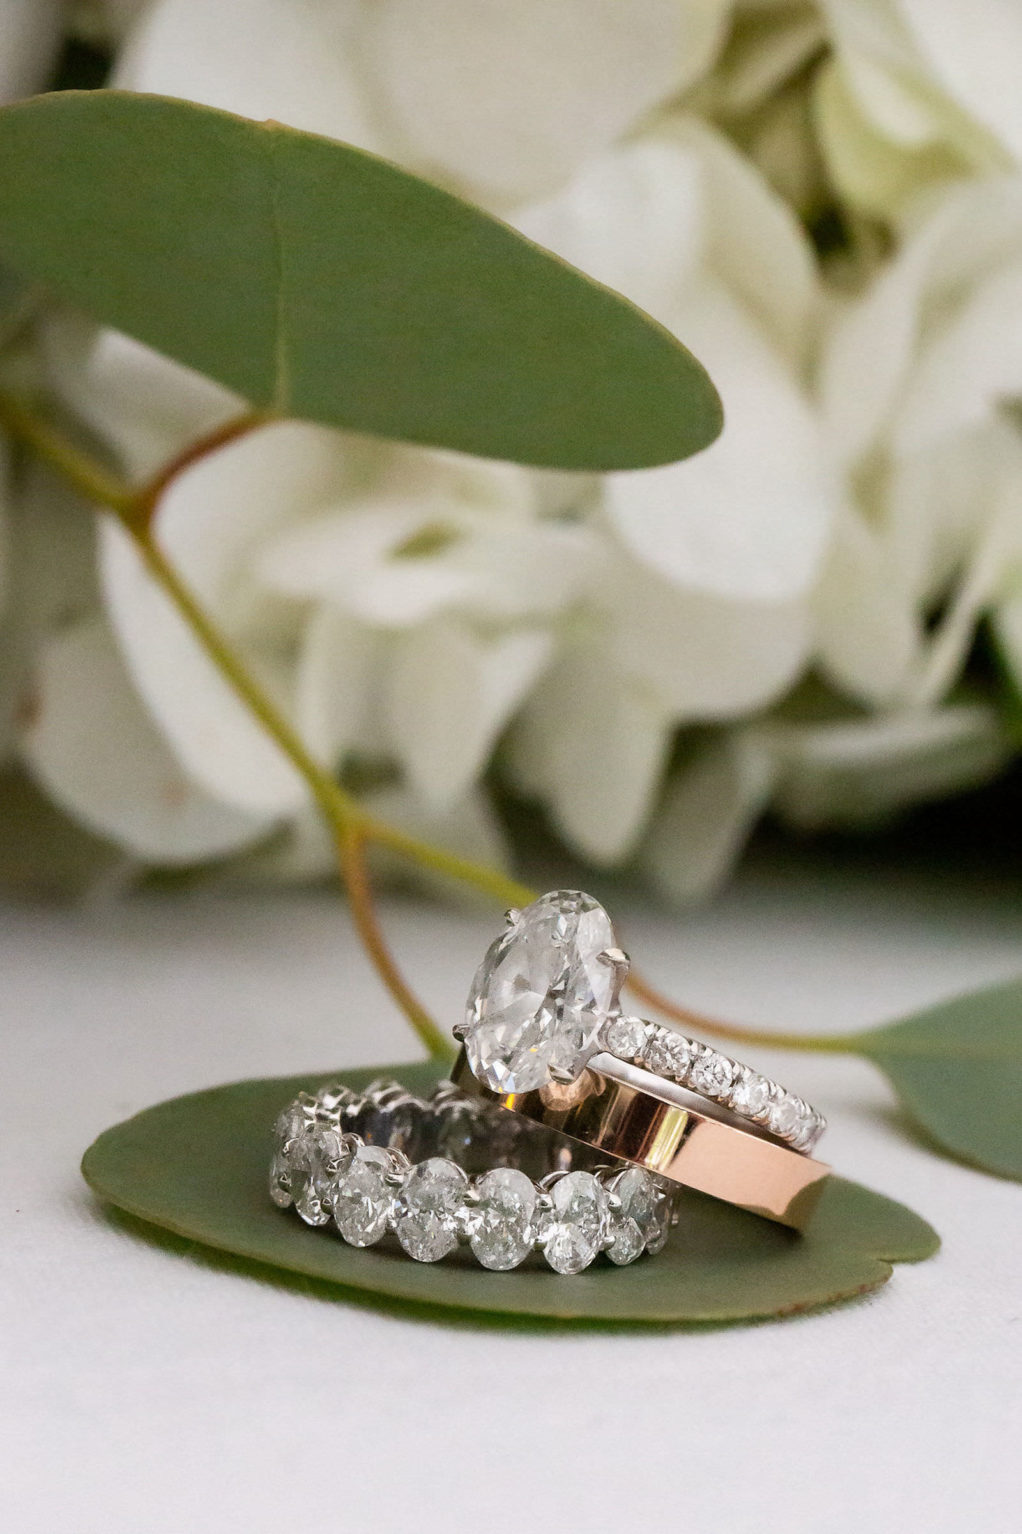 Wedding Ring Shot | Oval Solitaire Diamond Engagement Ring with Channel Set Diamond Band and Rose Gold Polished Band